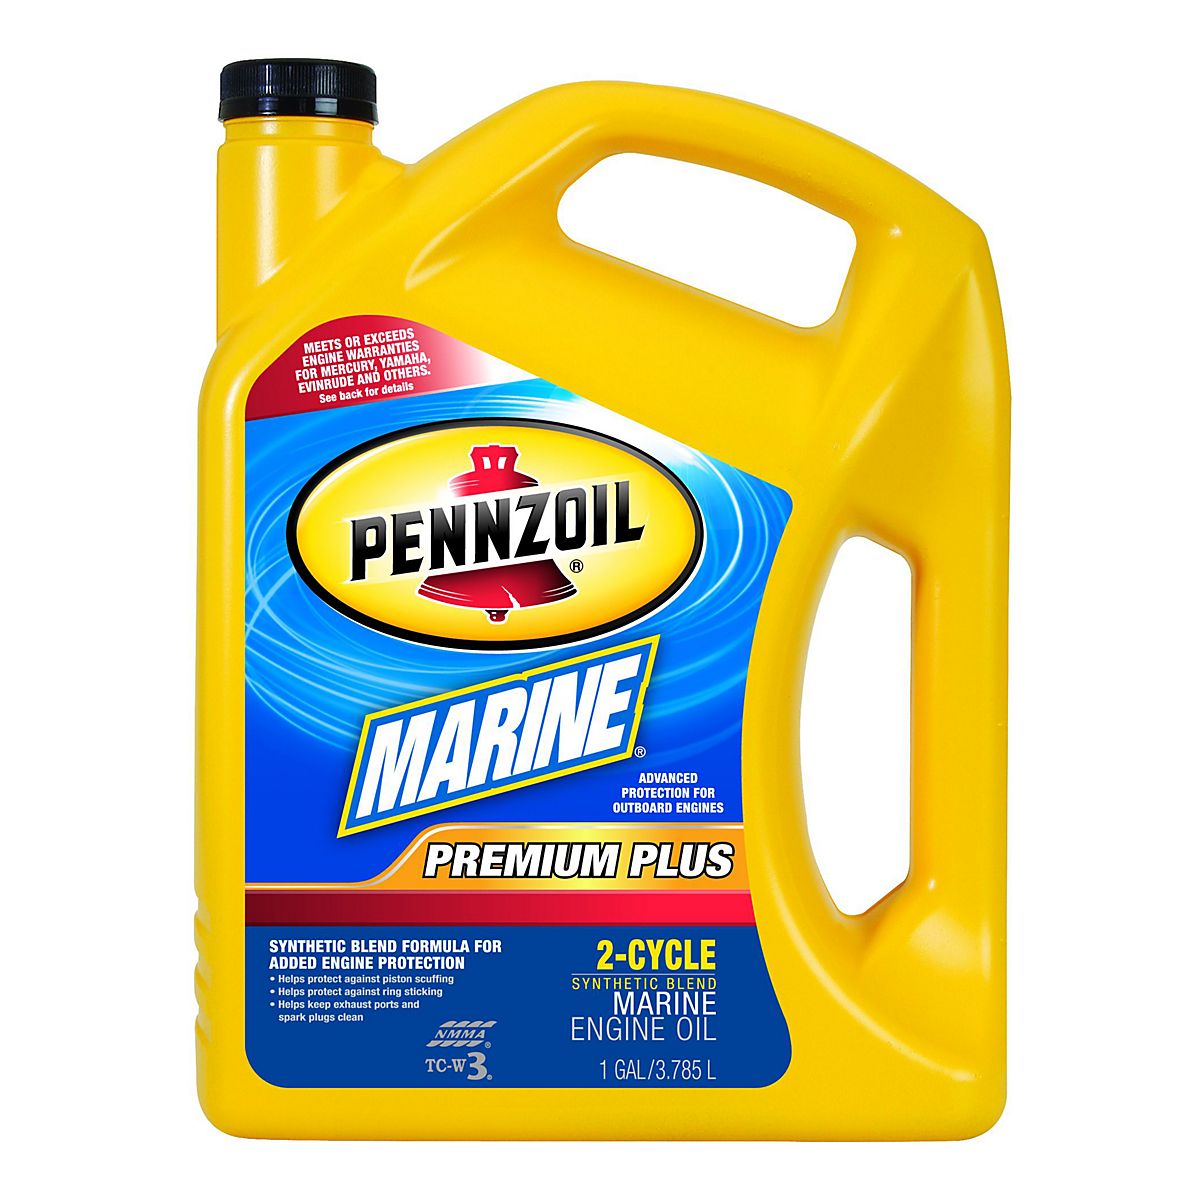 Pennzoil Synthetic Blend How Many Miles